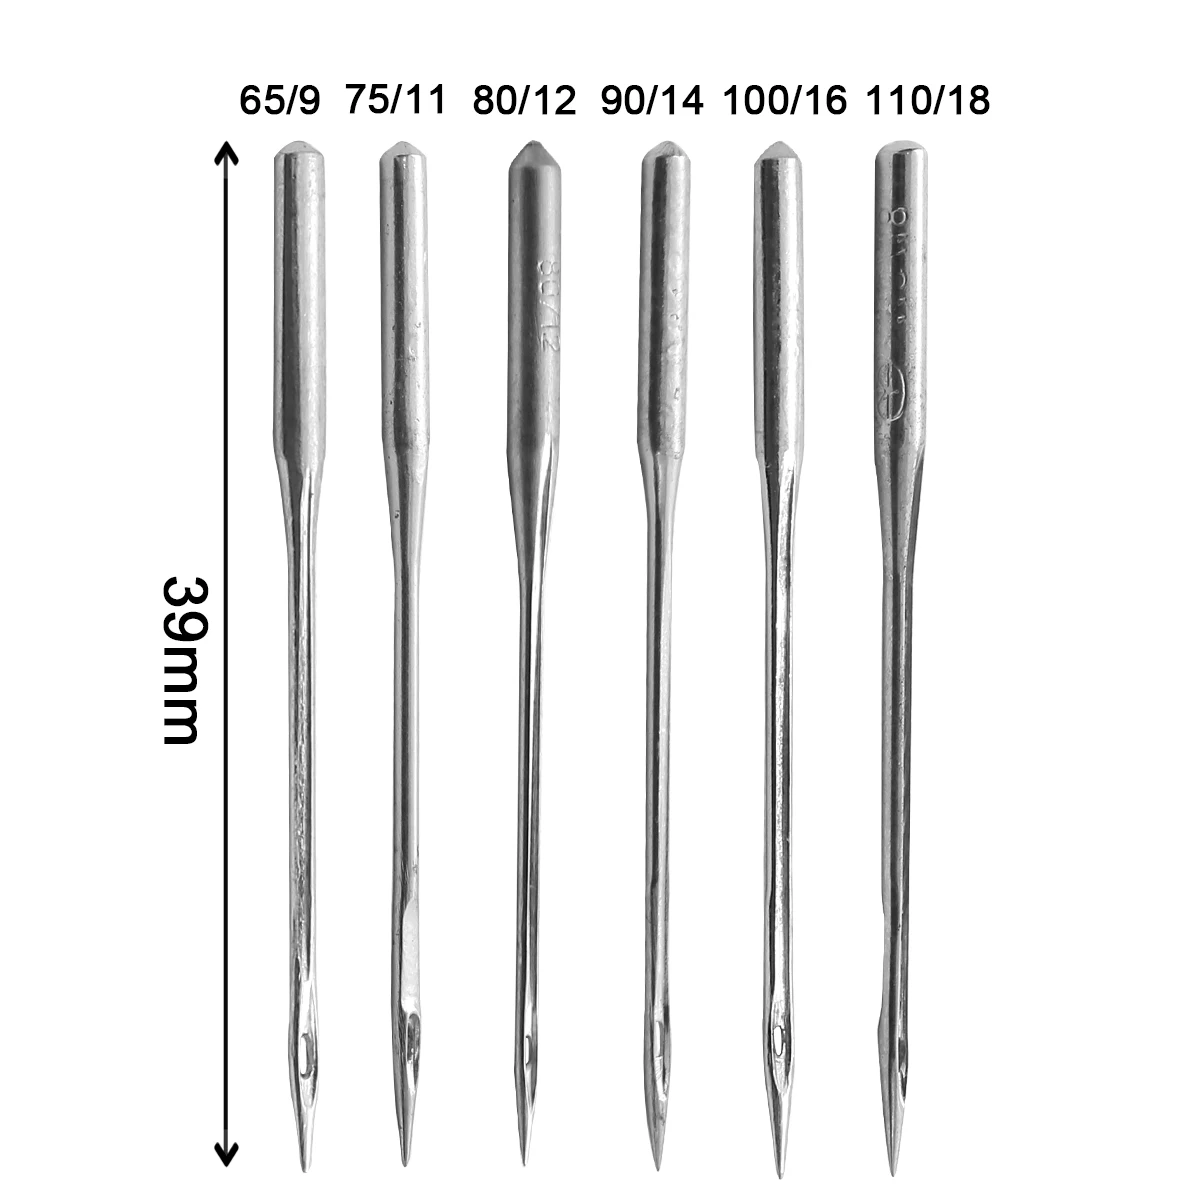 

10Pcs/Pack Sewing Needles ORGAN Household Sewing Machine Needles for SINGER BROTHER 9/65 11/75 12/80 14/90 16/100 18/110